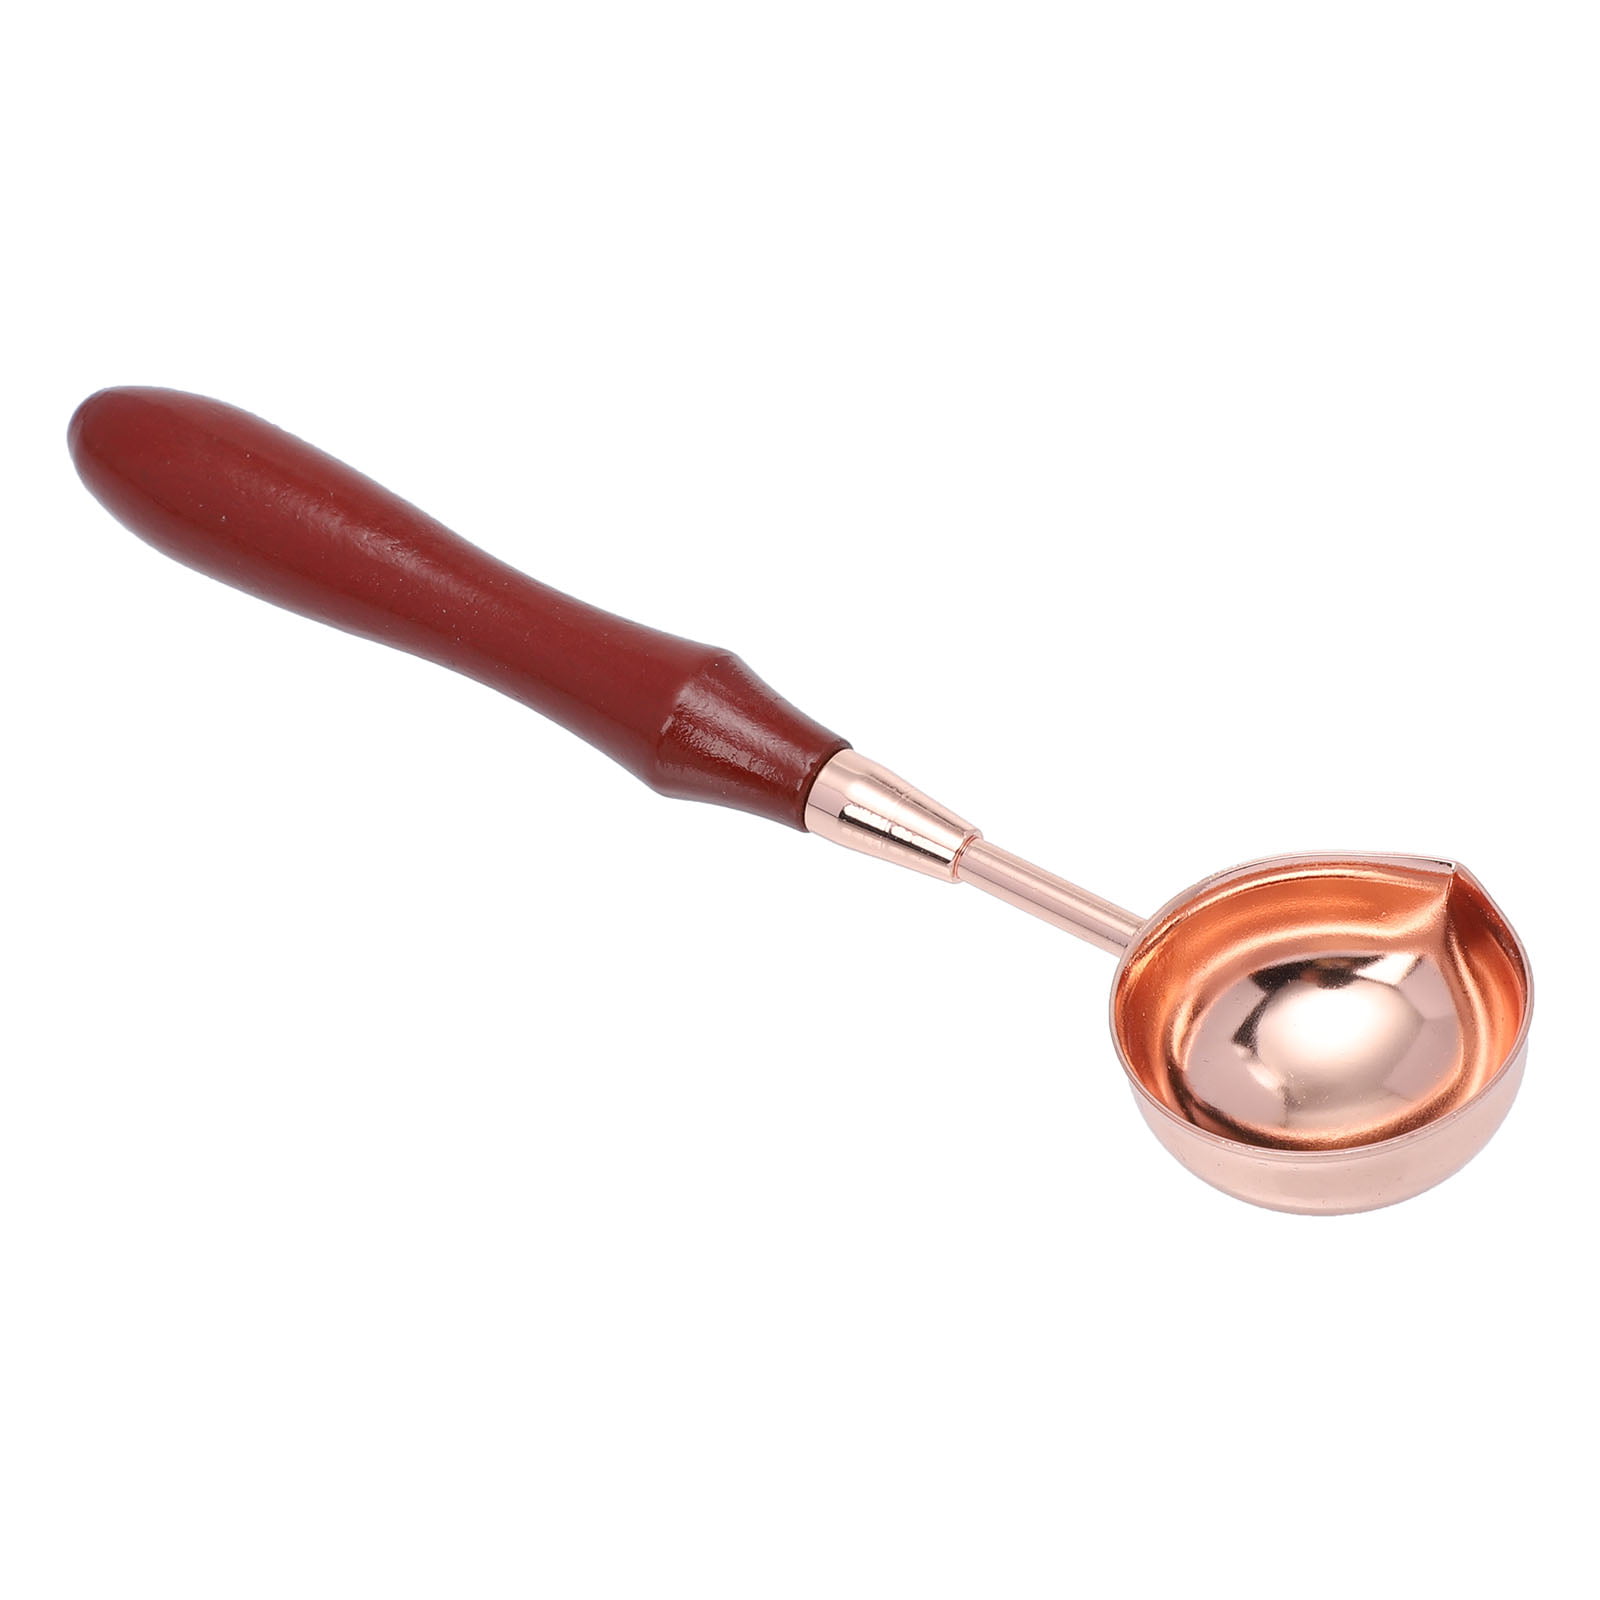 Seal Wax Melting Spoon Gold, Silver & Copper with Long Wooden Handle -  Sitaram Stationers